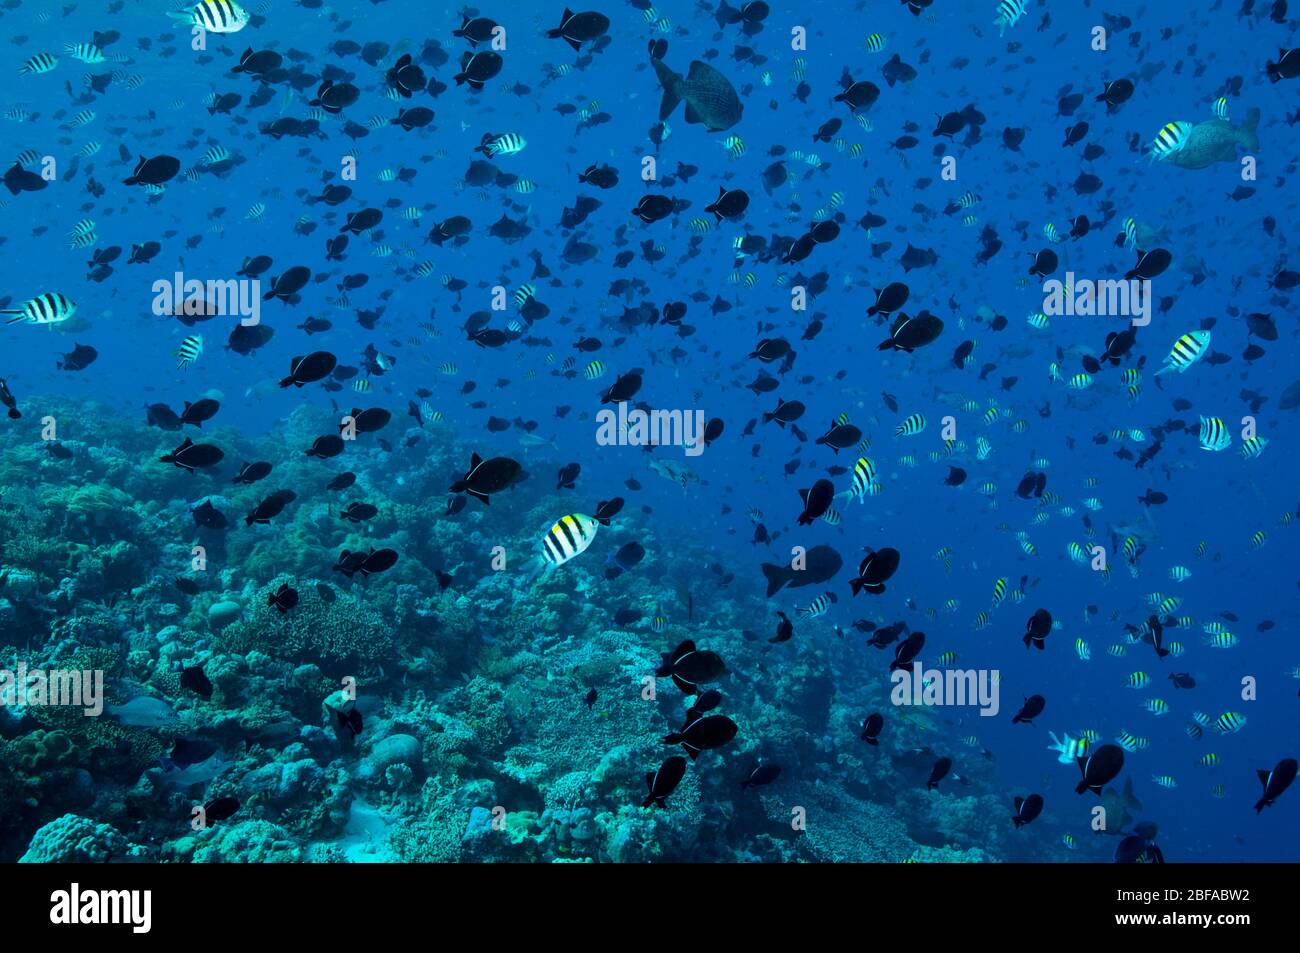 Reef scenic with massive spawning aggregation of Black triggerfish, Melichthys niger, school Sulawesi Indonesia Stock Photo